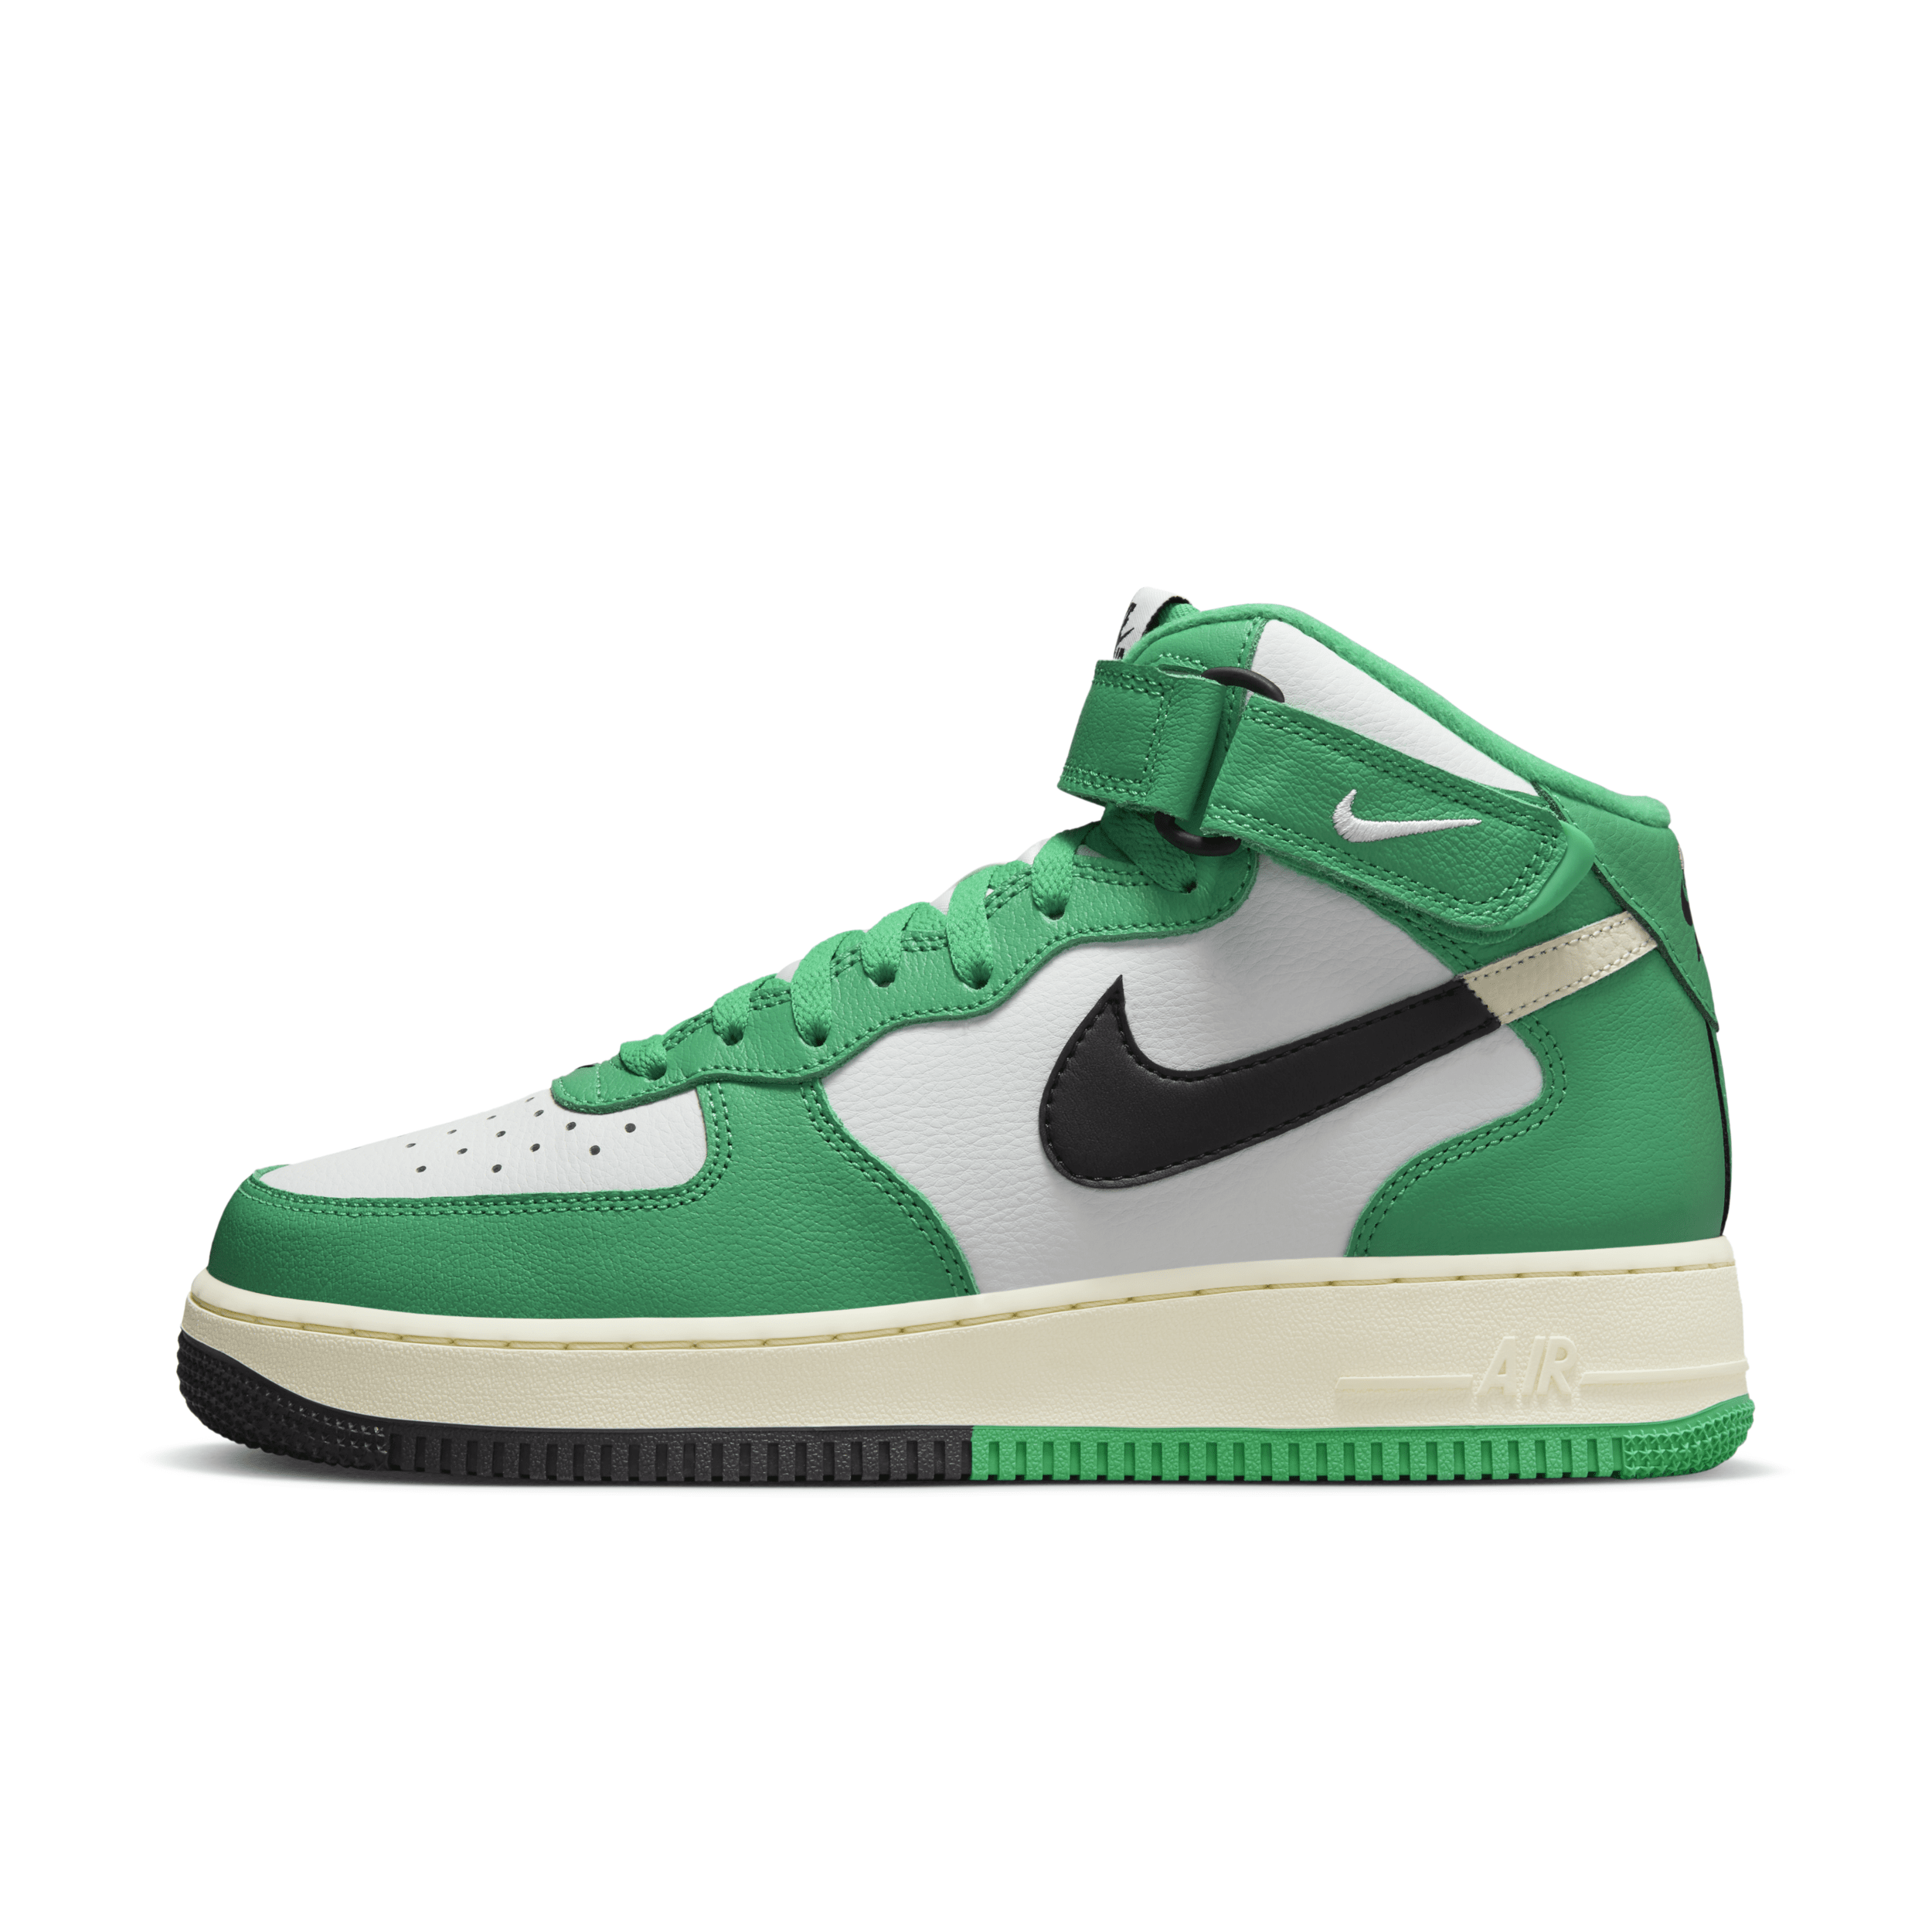 NIKE MEN'S AIR FORCE 1 MID '07 LV8 SHOES,1012328856